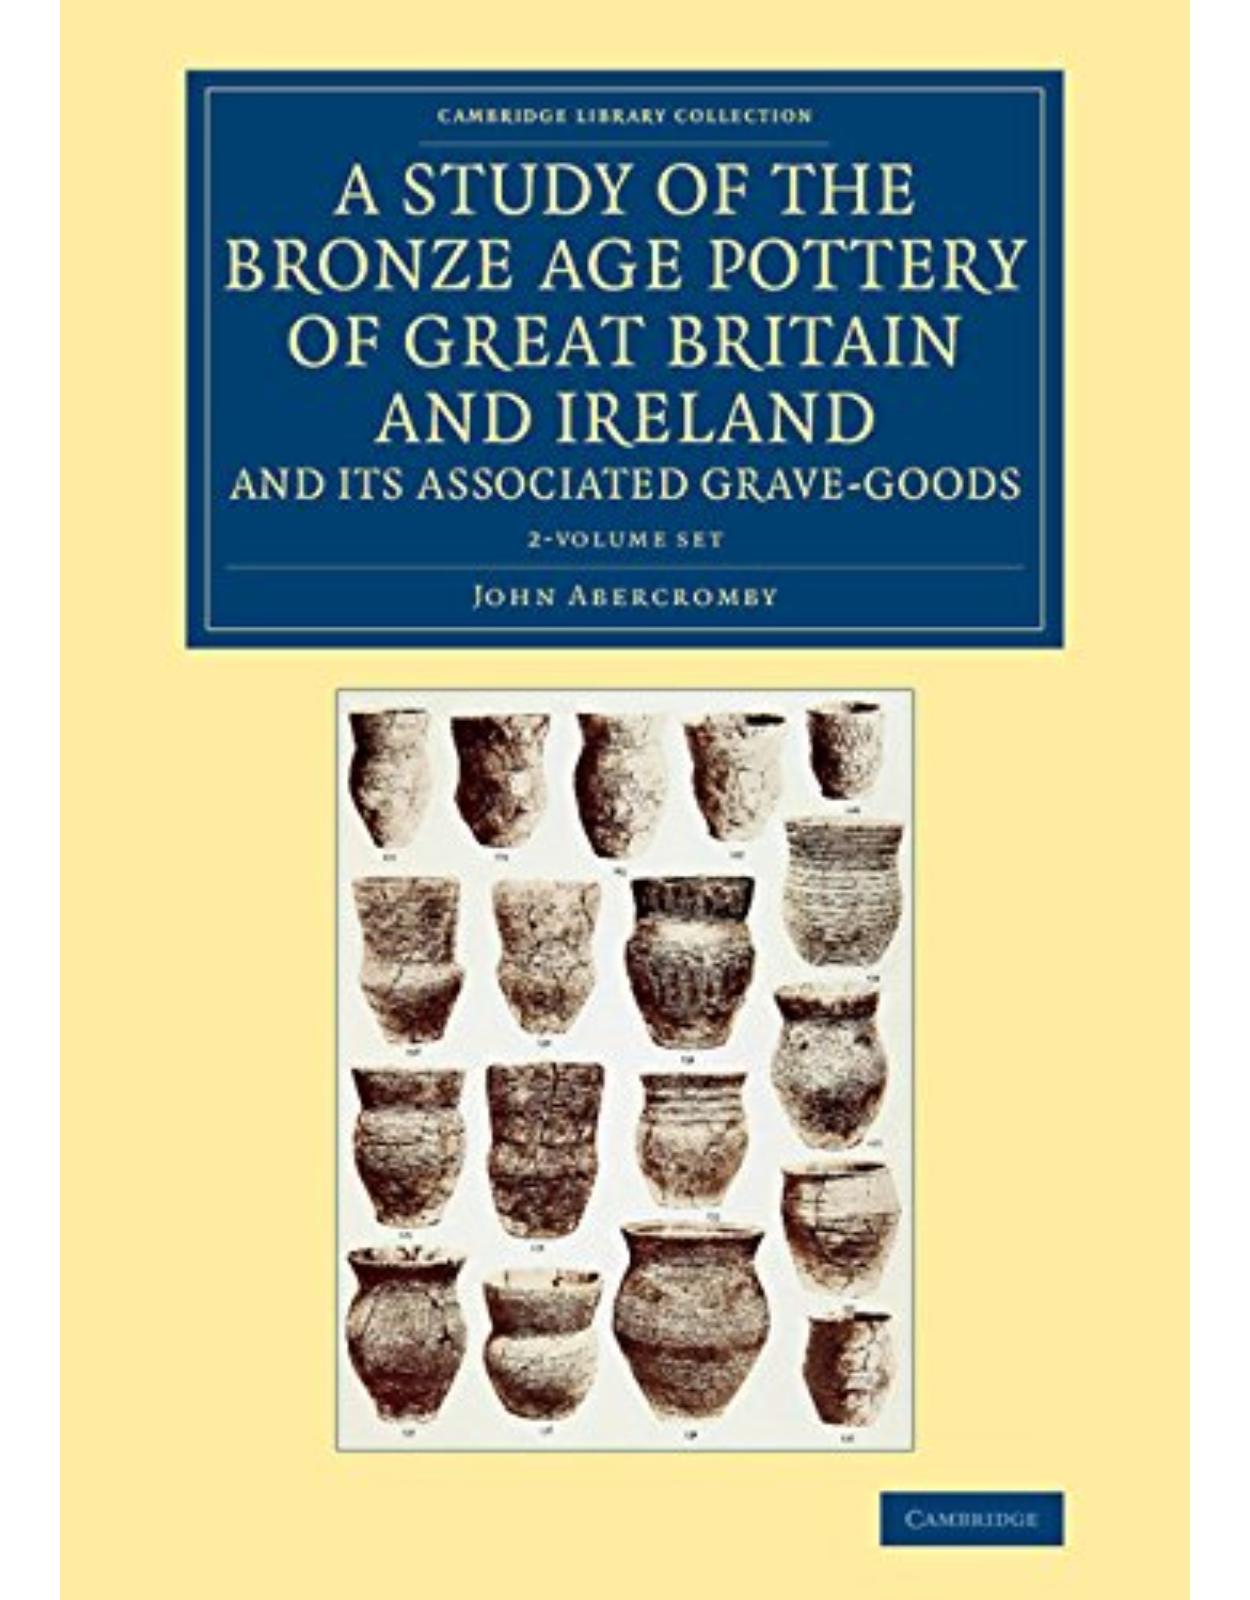 A Study of the Bronze Age Pottery of Great Britain and Ireland and its Associated Grave-Goods 2 Volume Set: 1-2 (Cambridge Library Collection - Archaeology)